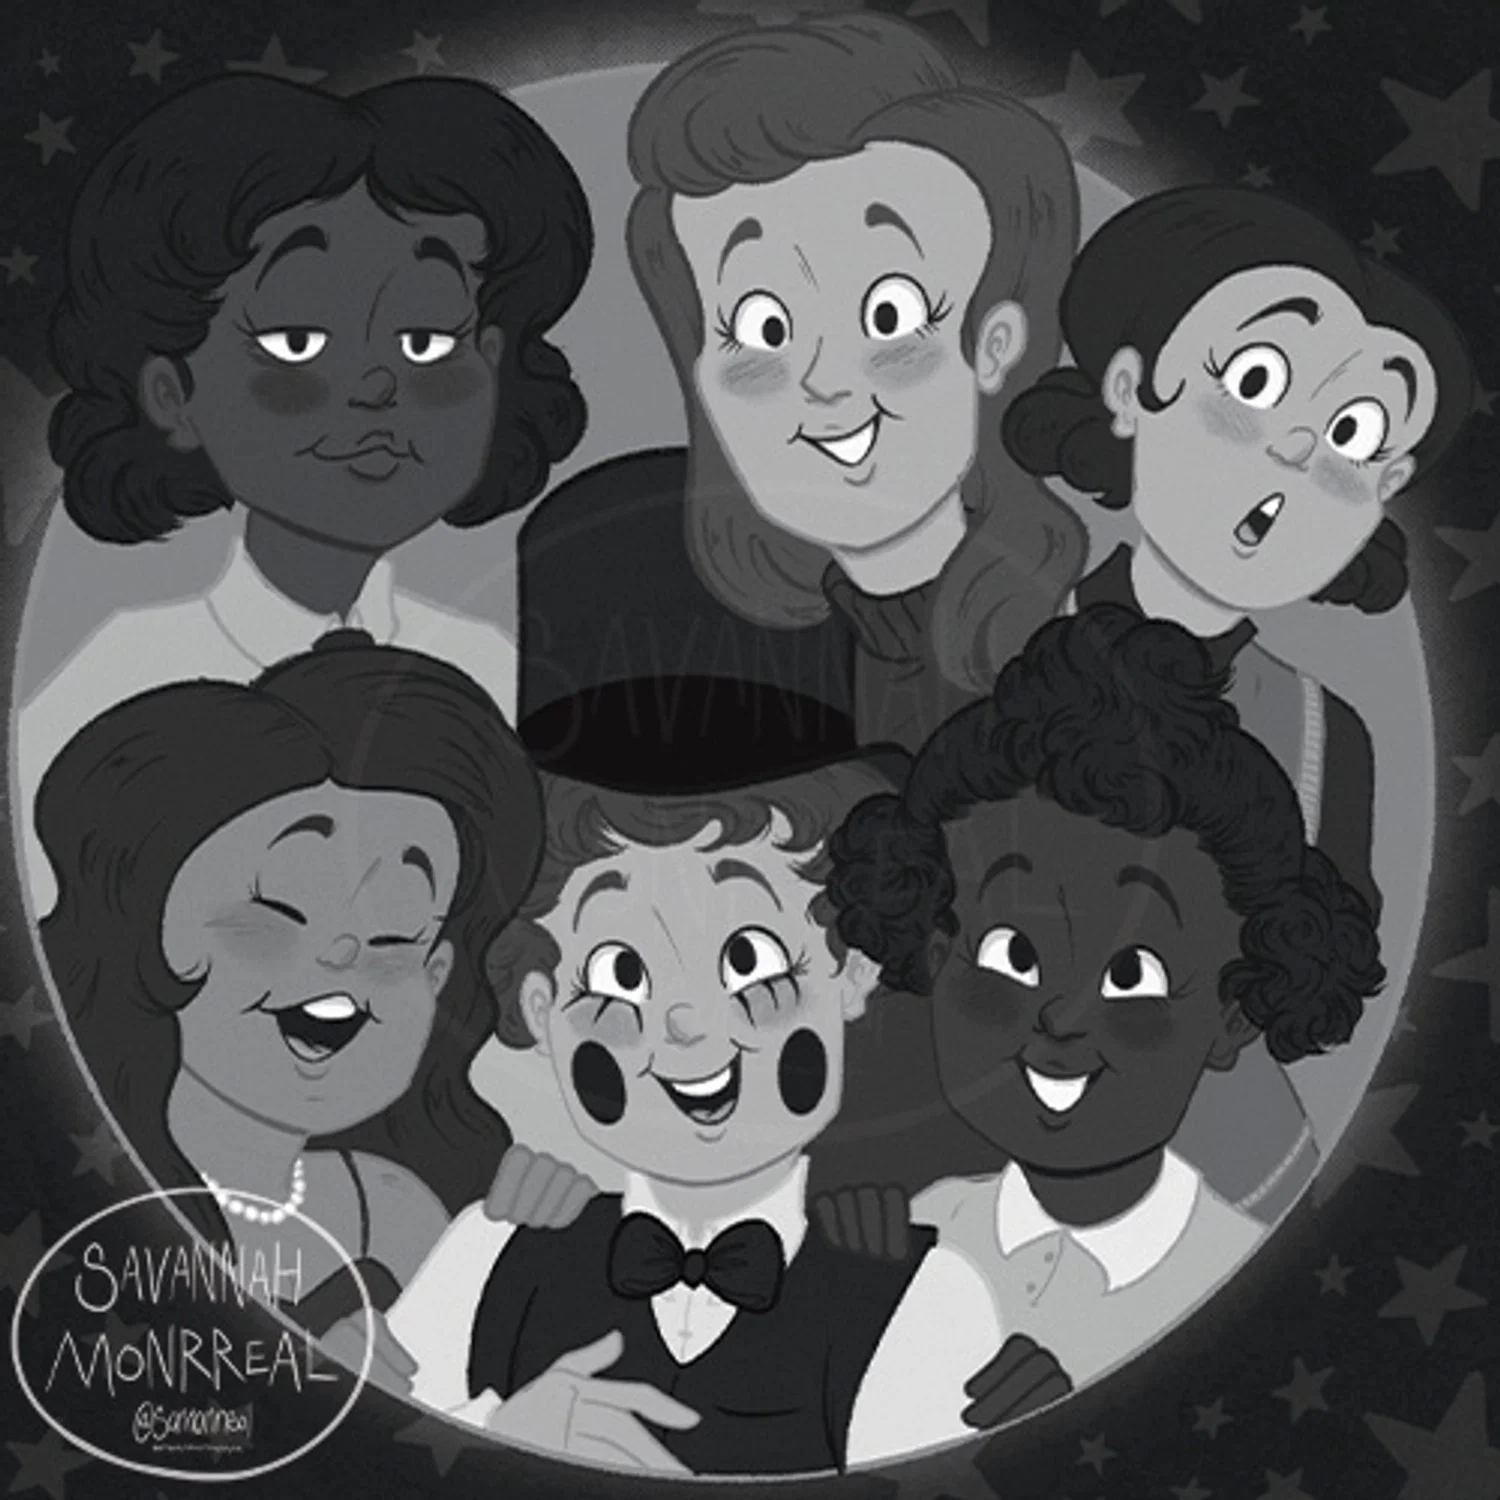 Main character is with a circle with five other bandmates, each with varying happy expressions. The background outside of the circle is black with light stars scattered around. The image is monochrome. The girl on the left has long dark hair and is wearing pearls and a dark dress. Above her is a girl with short black hair and she's wearing a white collared shirt and a tie. Next to her, the third girl has long light hair that is swept to the side and is wearing a dark turtleneck. The fourth girl has short black hair that is curled at the end and she is wearing a light collared shirt and a dark sweater vest. Her face is more surprised that the rest. The fifth girl has curly dark hair and she is wearing a light dress which has a collar and short sleeves. The main character is wearing a black tuxedo and a top hat, he is tin the center of the group. There is a watermark in the corner that says "Savannah Monrreal @samonrreal"